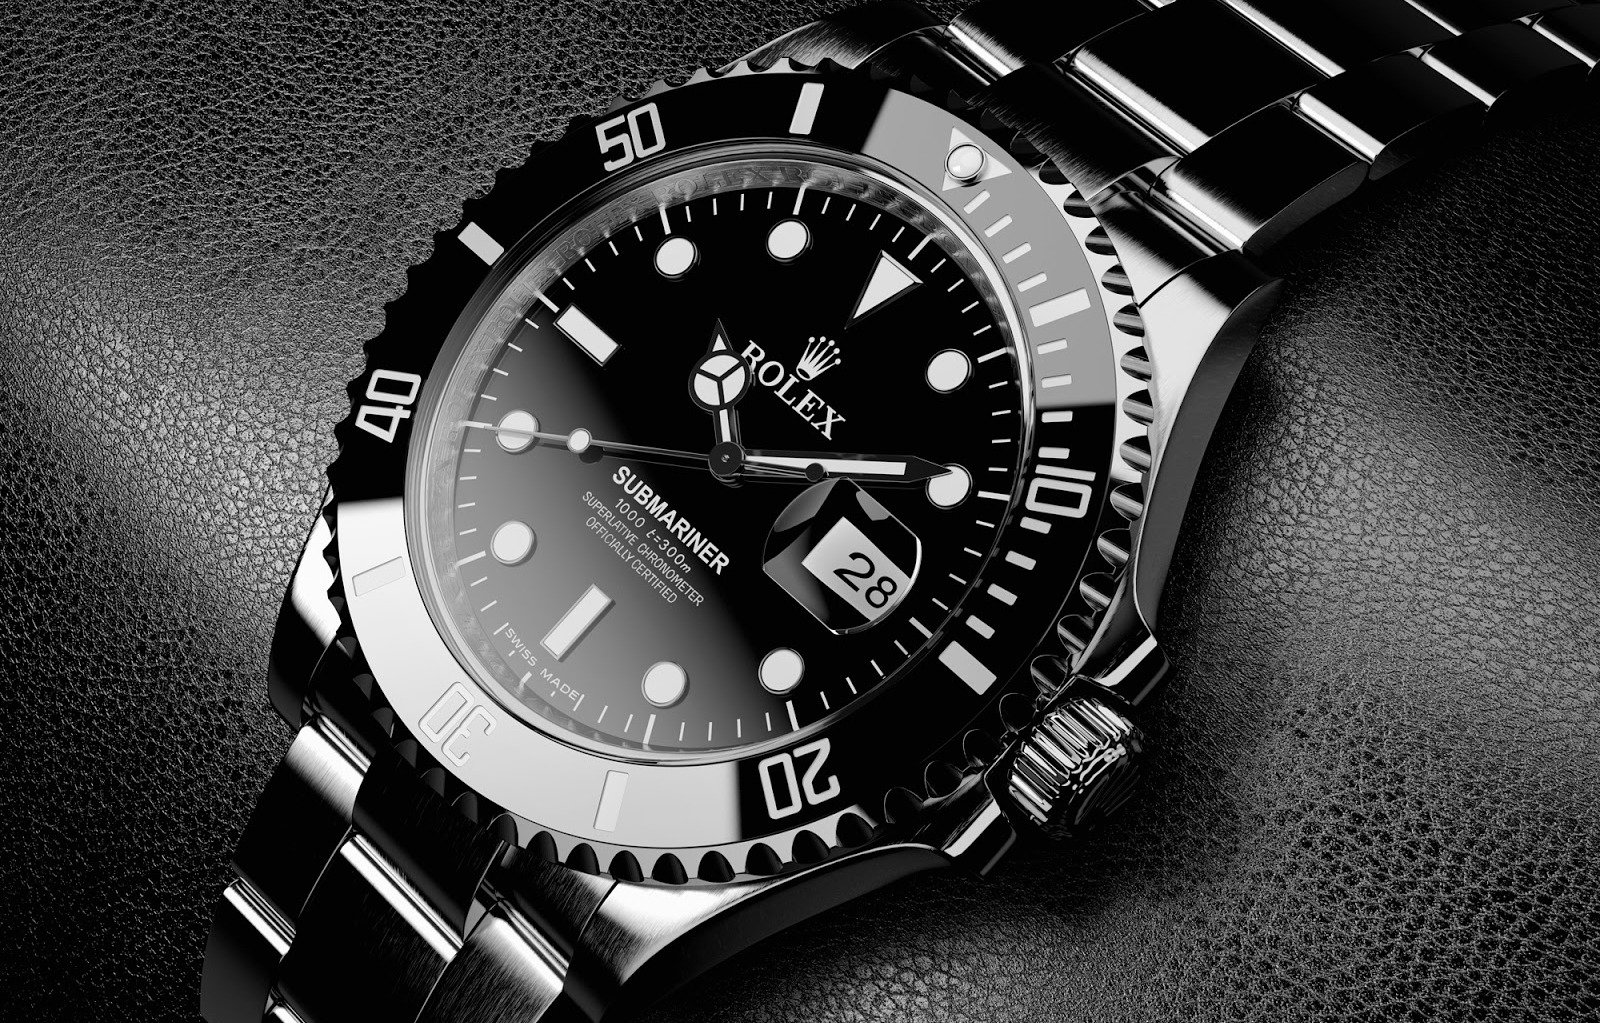 Know Your Watch Brand: 9 Cool Facts About Rolex